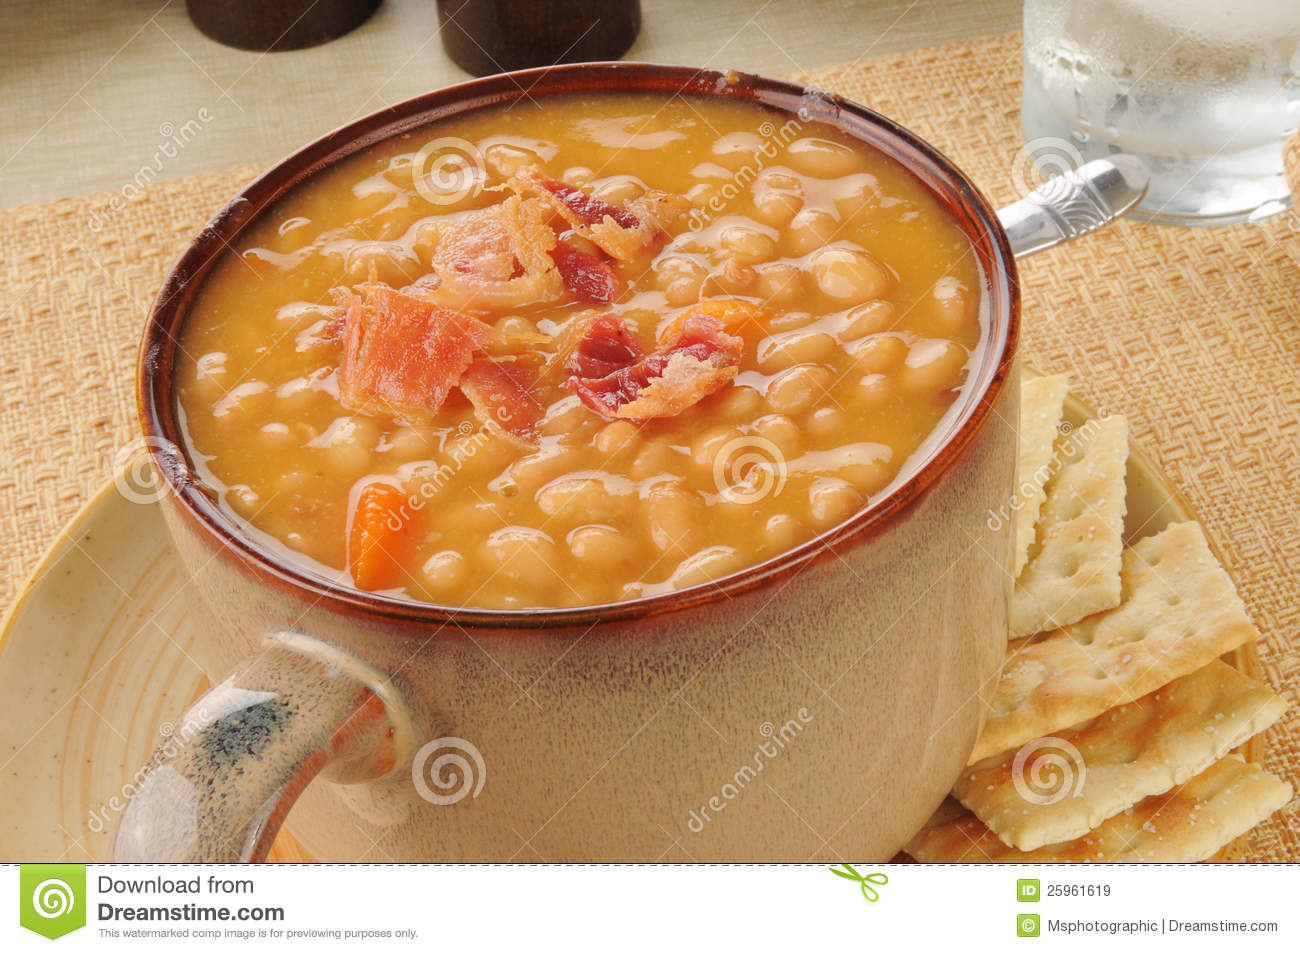 Bean With Bacon Soup With Crackers Royalty Free Stock Images   Image